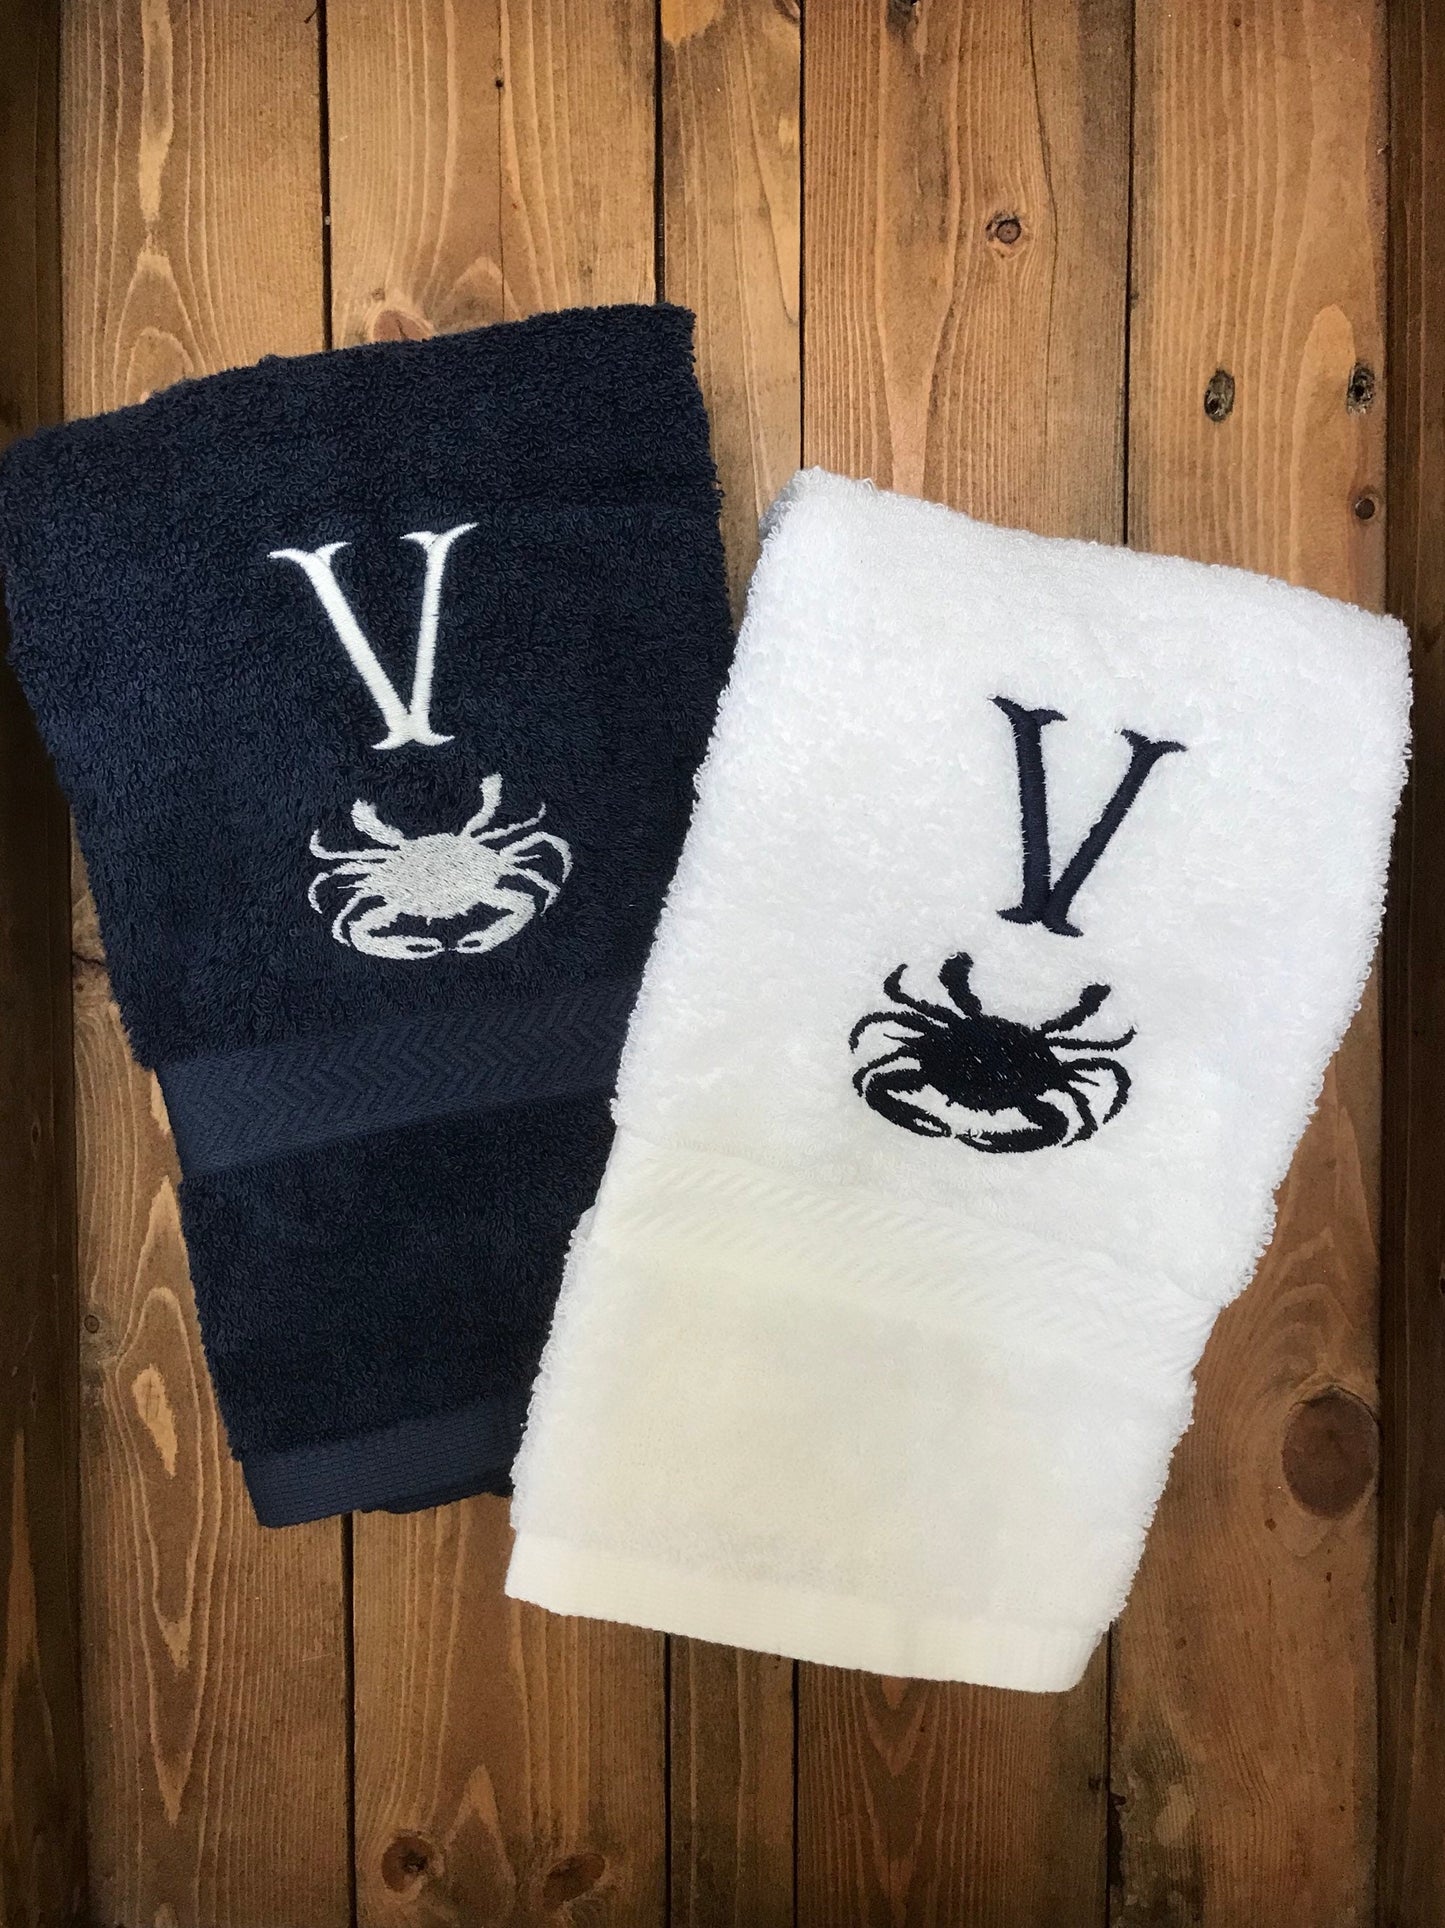 Crab Themed Personalized Bathroom Hand Towels or Kitchen Towels  -Cotton- Embroidered - Choose your Towel and Colors - Bath Towel